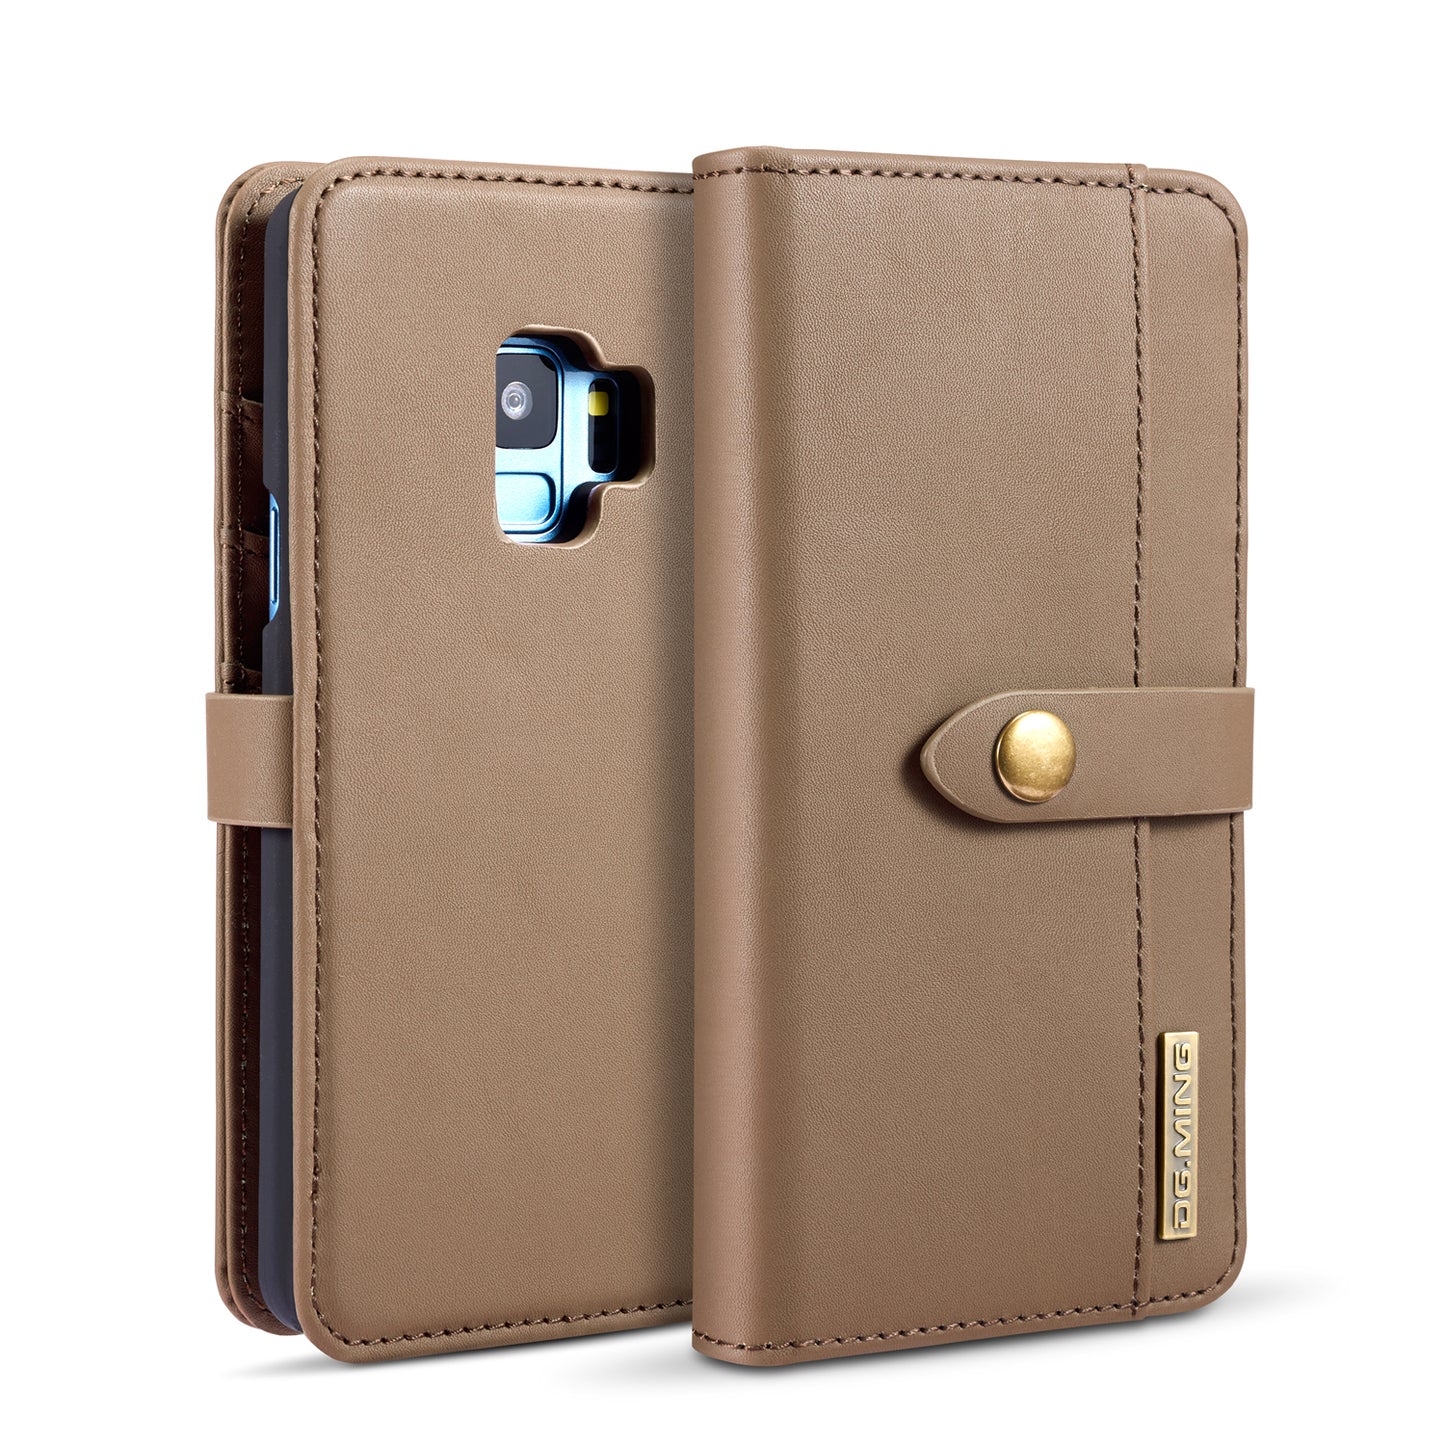 Flip Leather Card Holder Case for S8/S8 Plus/S9/S9 Plus - imhave